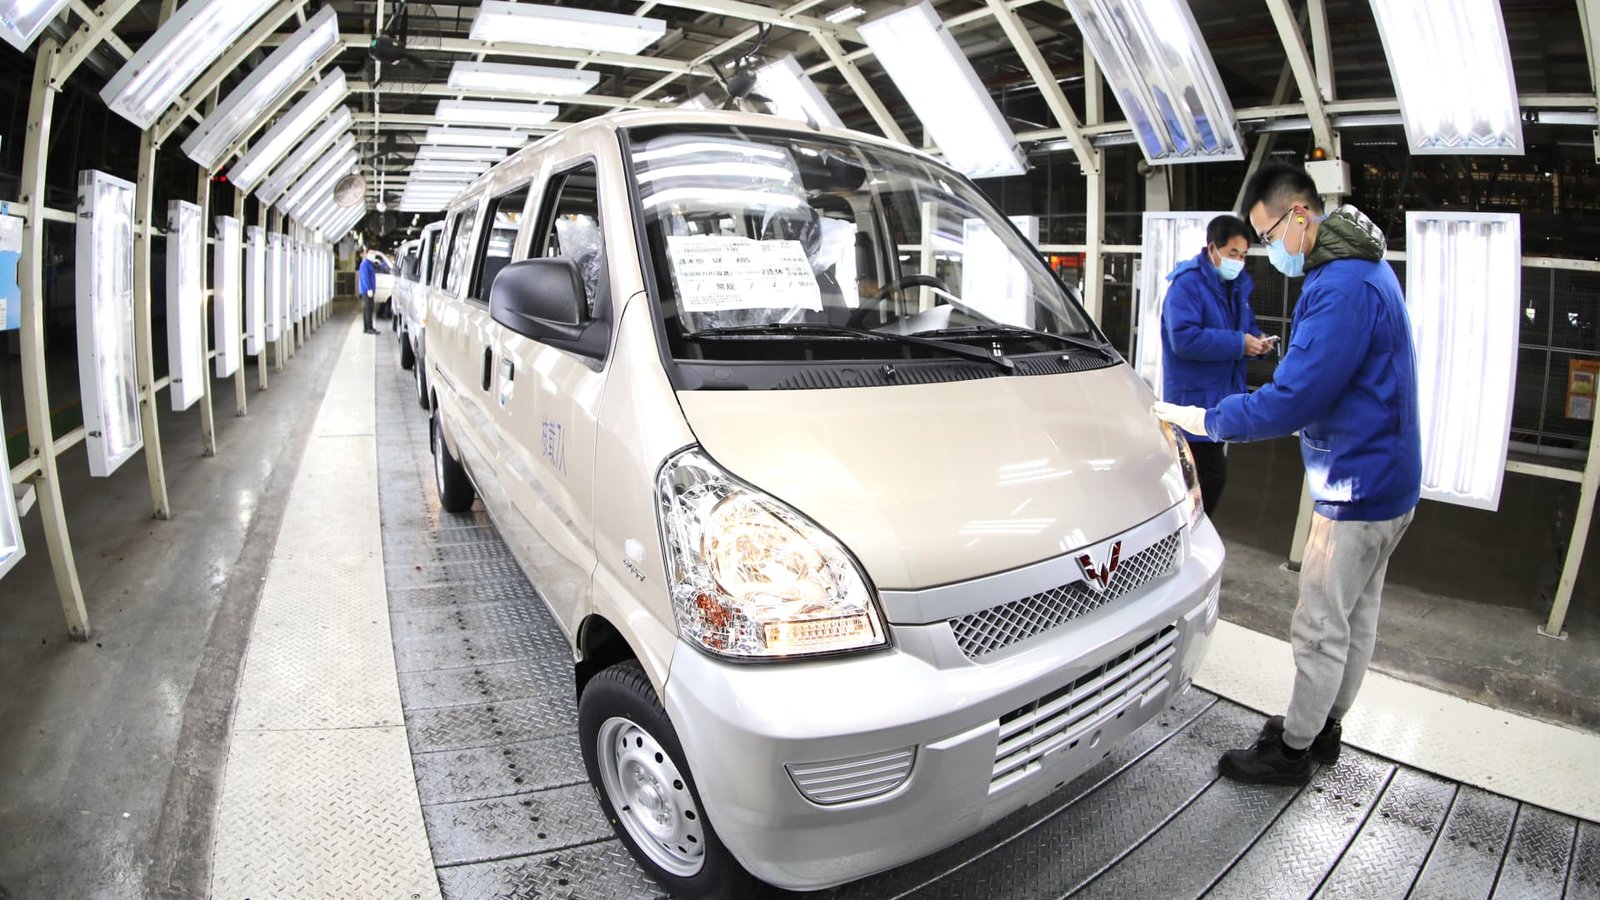 U.S. automakers like GM rapidly lose ground in China